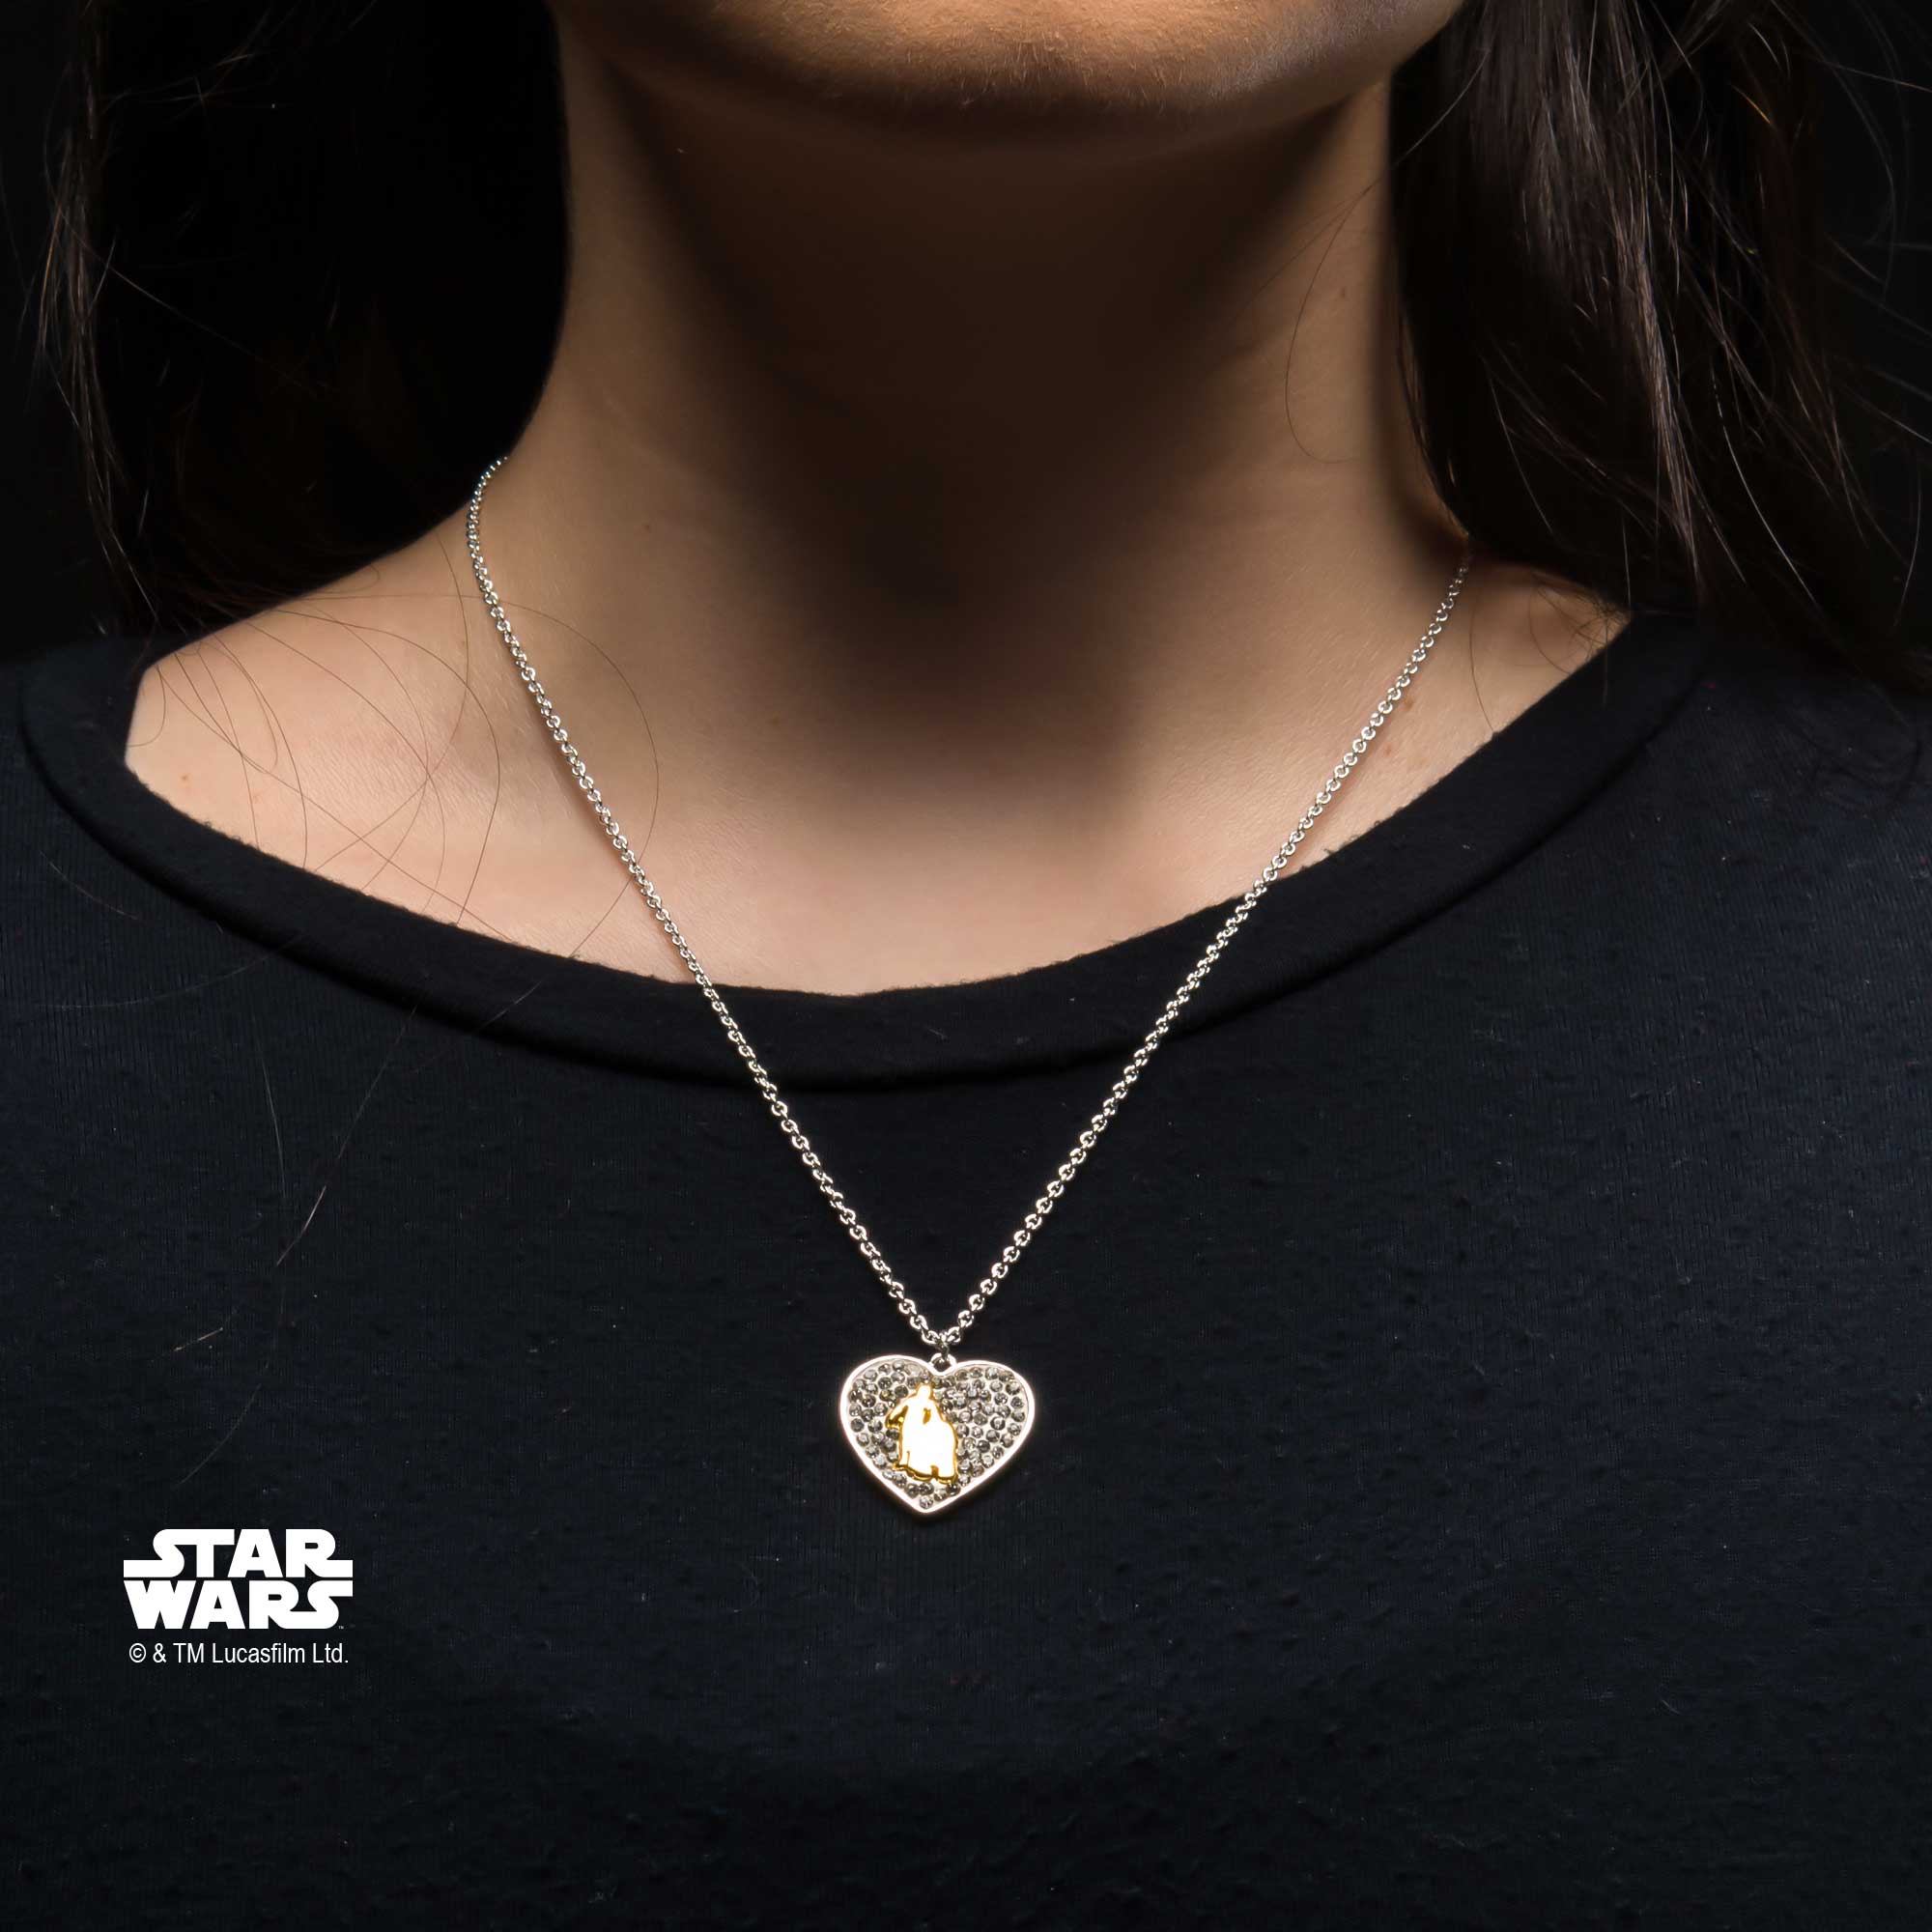 Star Wars Silver Plated R2D2 and C-3PO with Clear Gem Heart Pendant with Chain